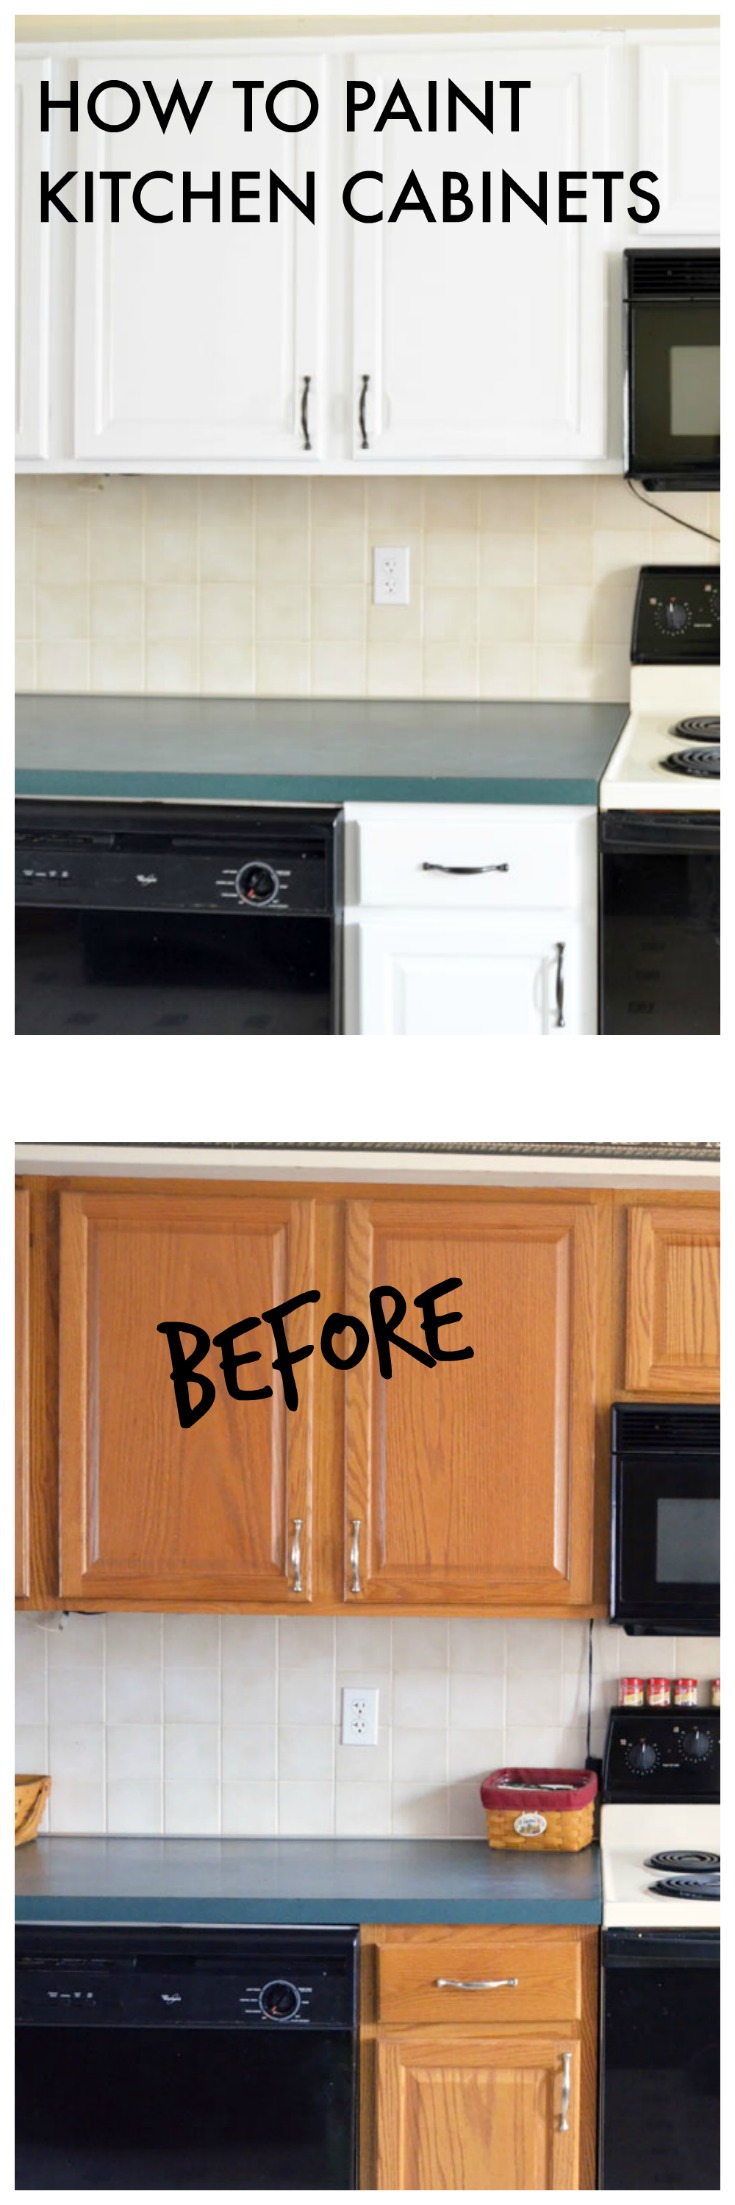 How to Paint Kitchen Cabinets - Before painting my kitchen cabinets, I did a lot of research. I found the perfect way to paint kitchen cabinets. It's not hard, but it will take some time and patience. I love my new white kitchen cabinets and can say that they are worth it!